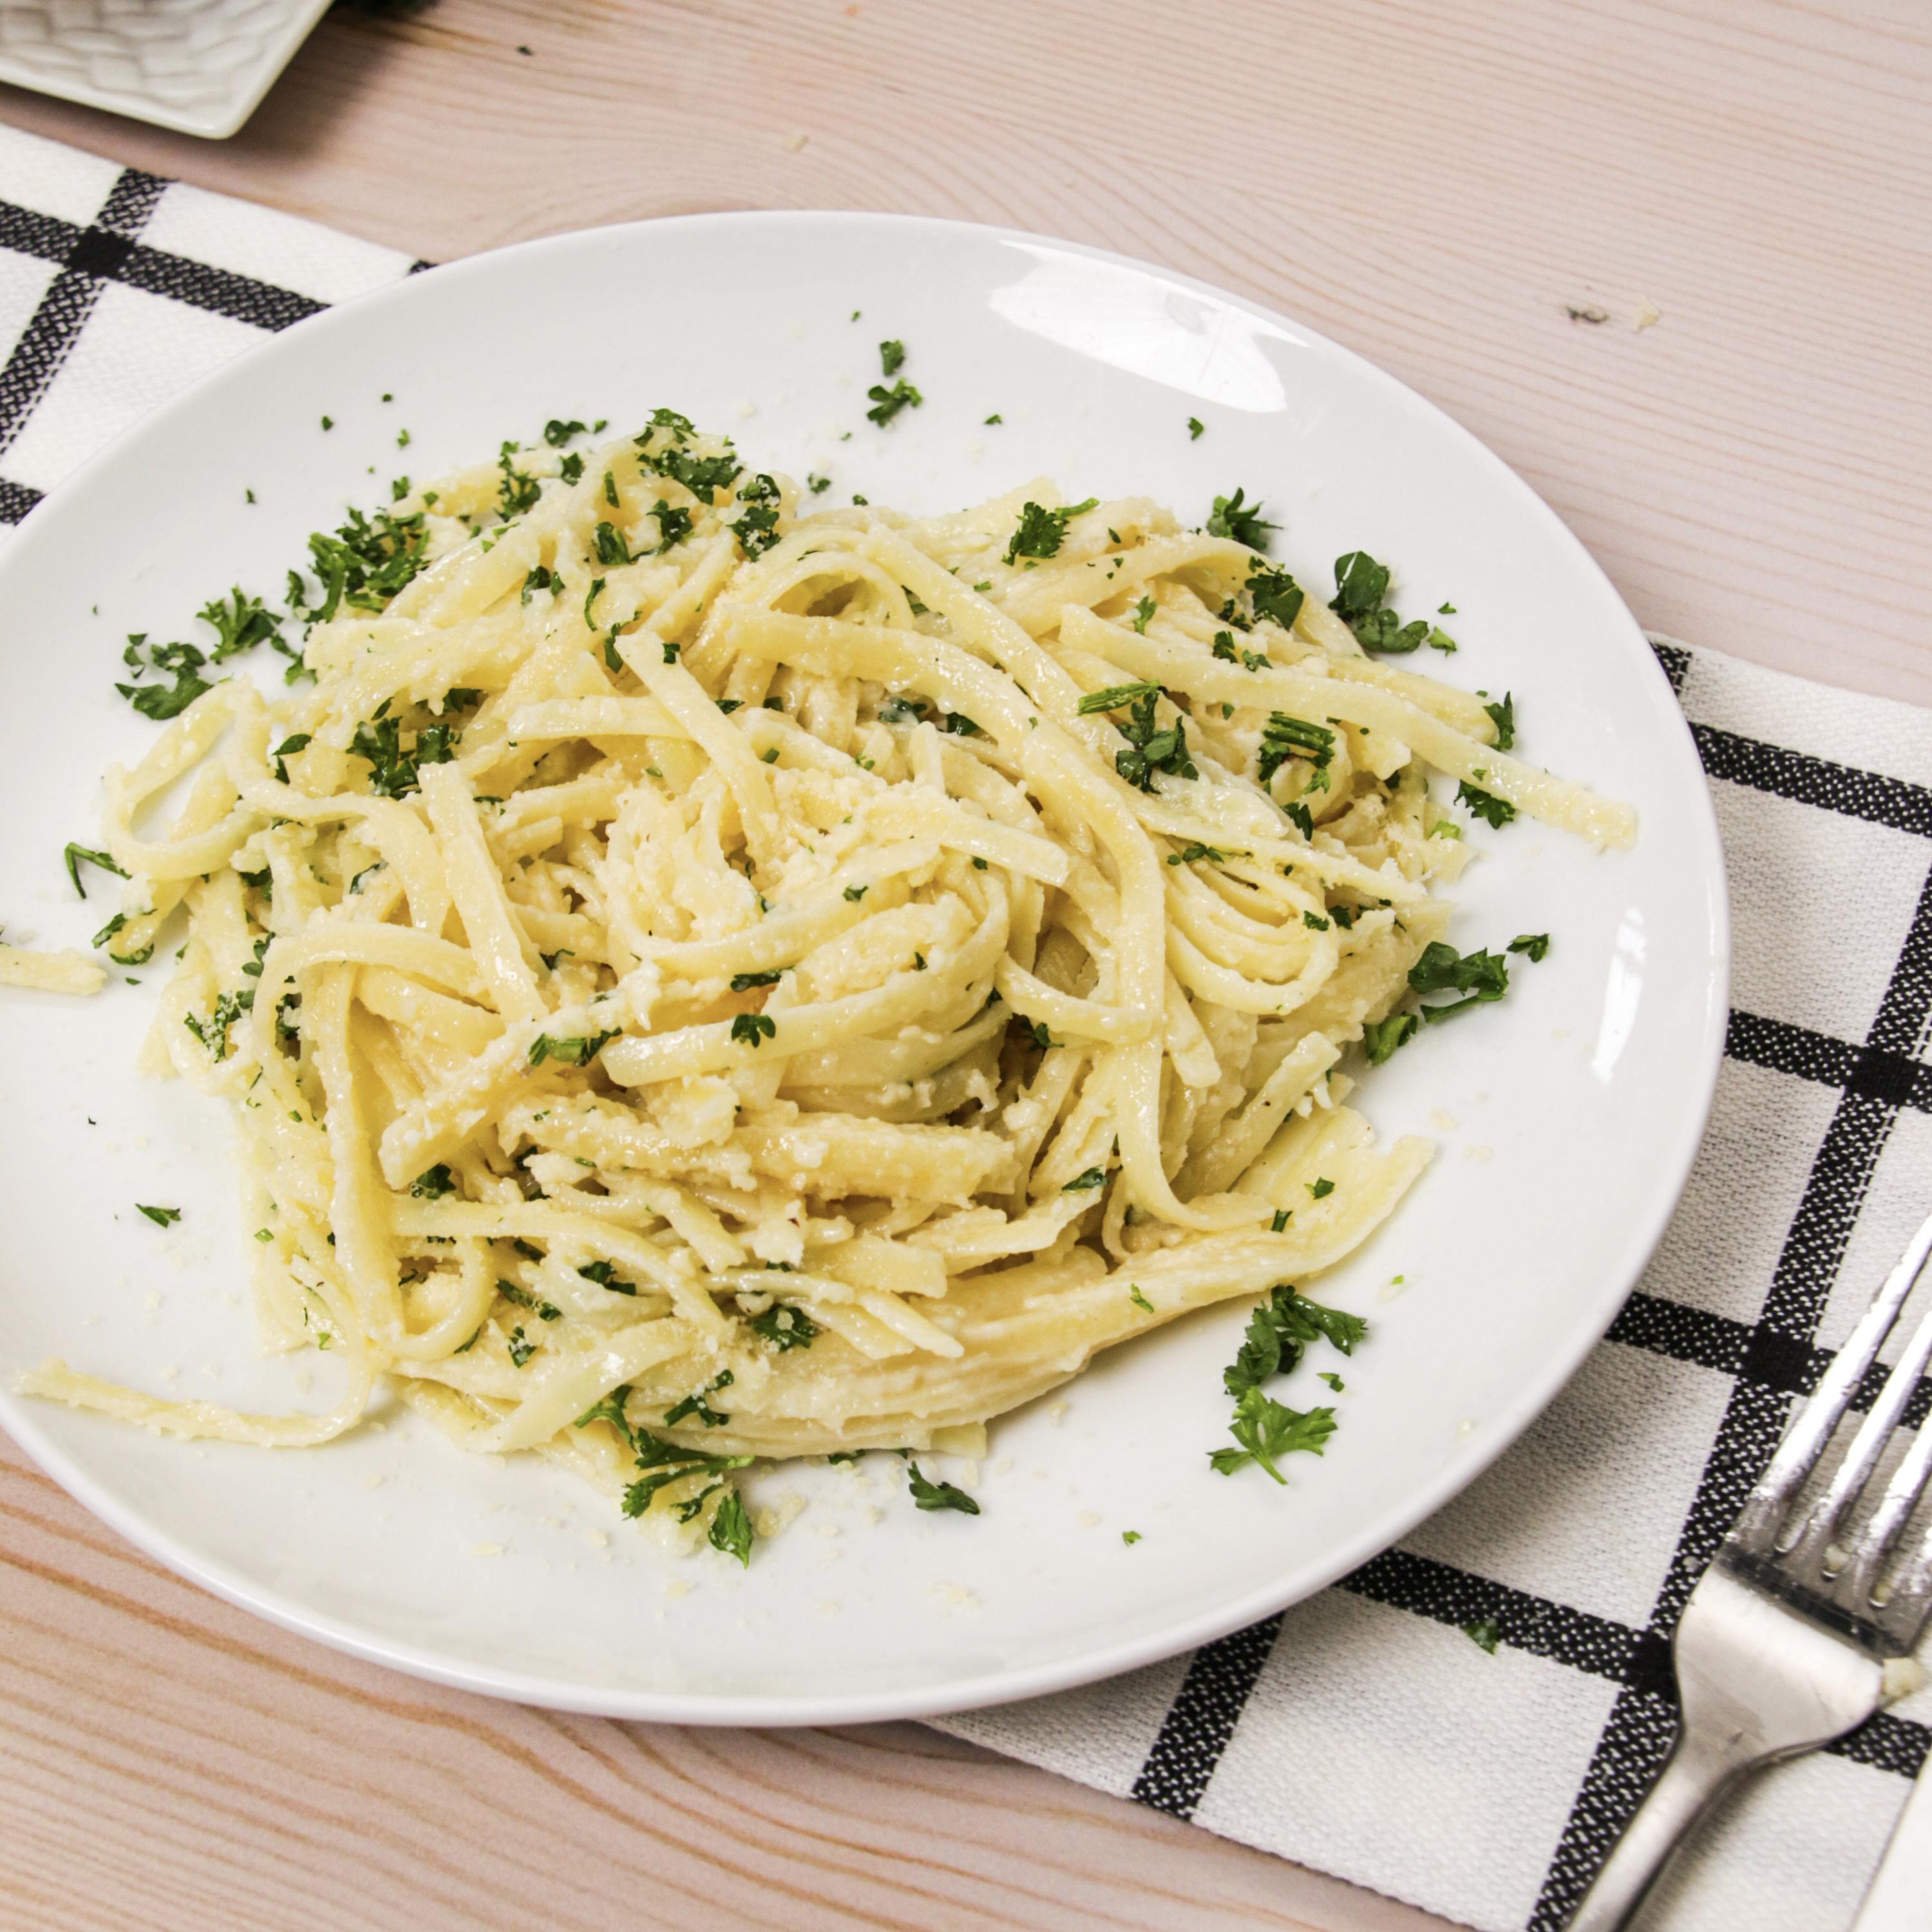 What Is Linguine?